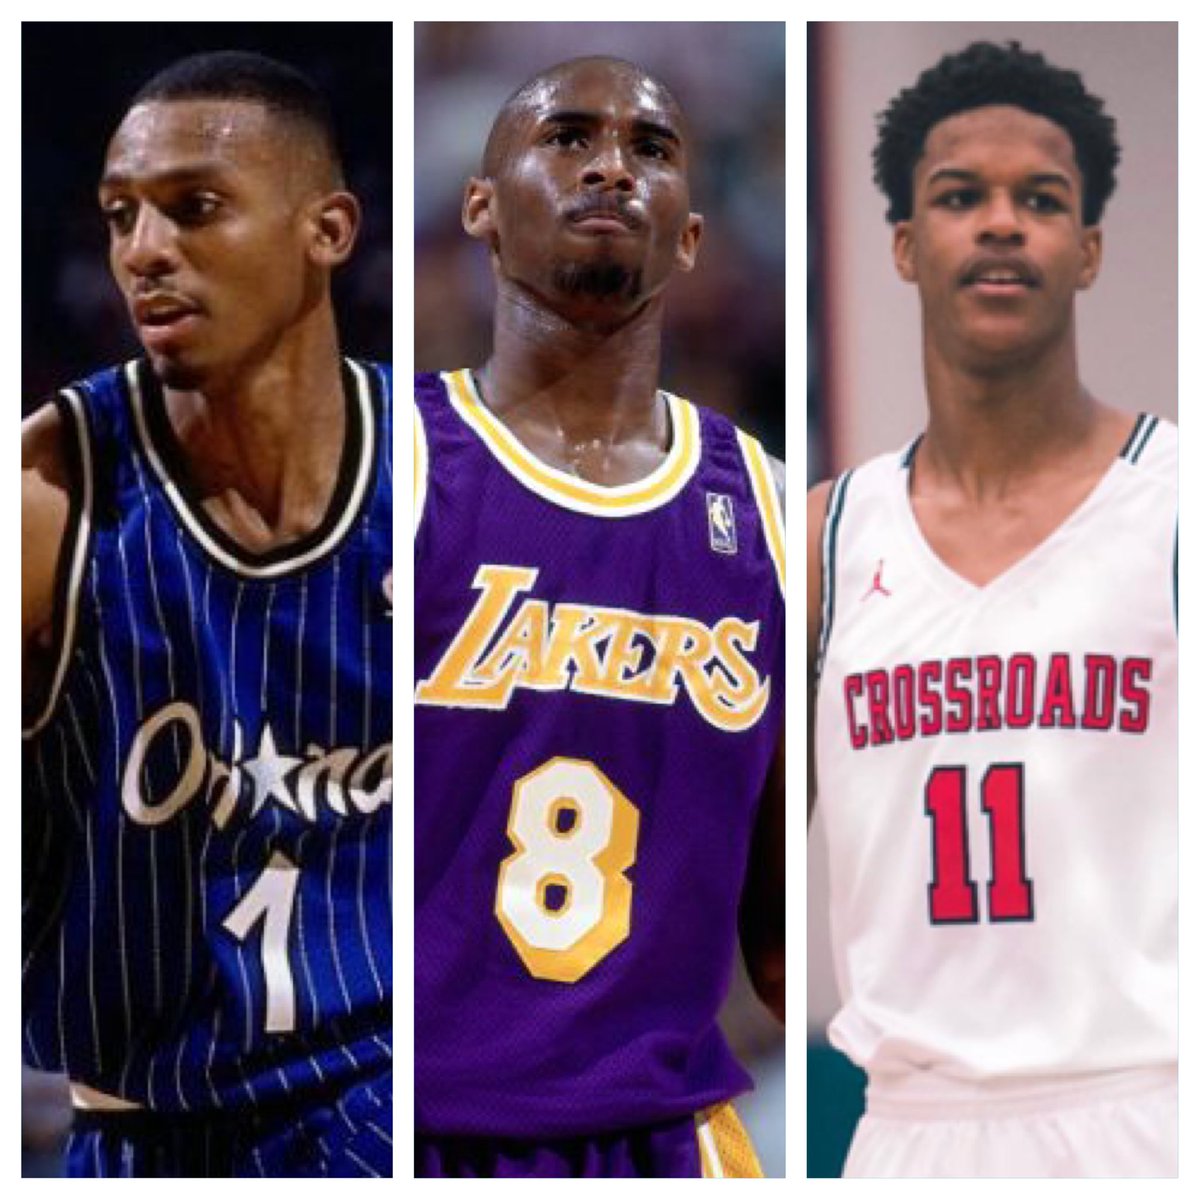 Yup I c the same thing in you that I saw in @kobebryant and @iam1cent #imneverwrong @SSjreef https://t.co/62j7d9j9cj